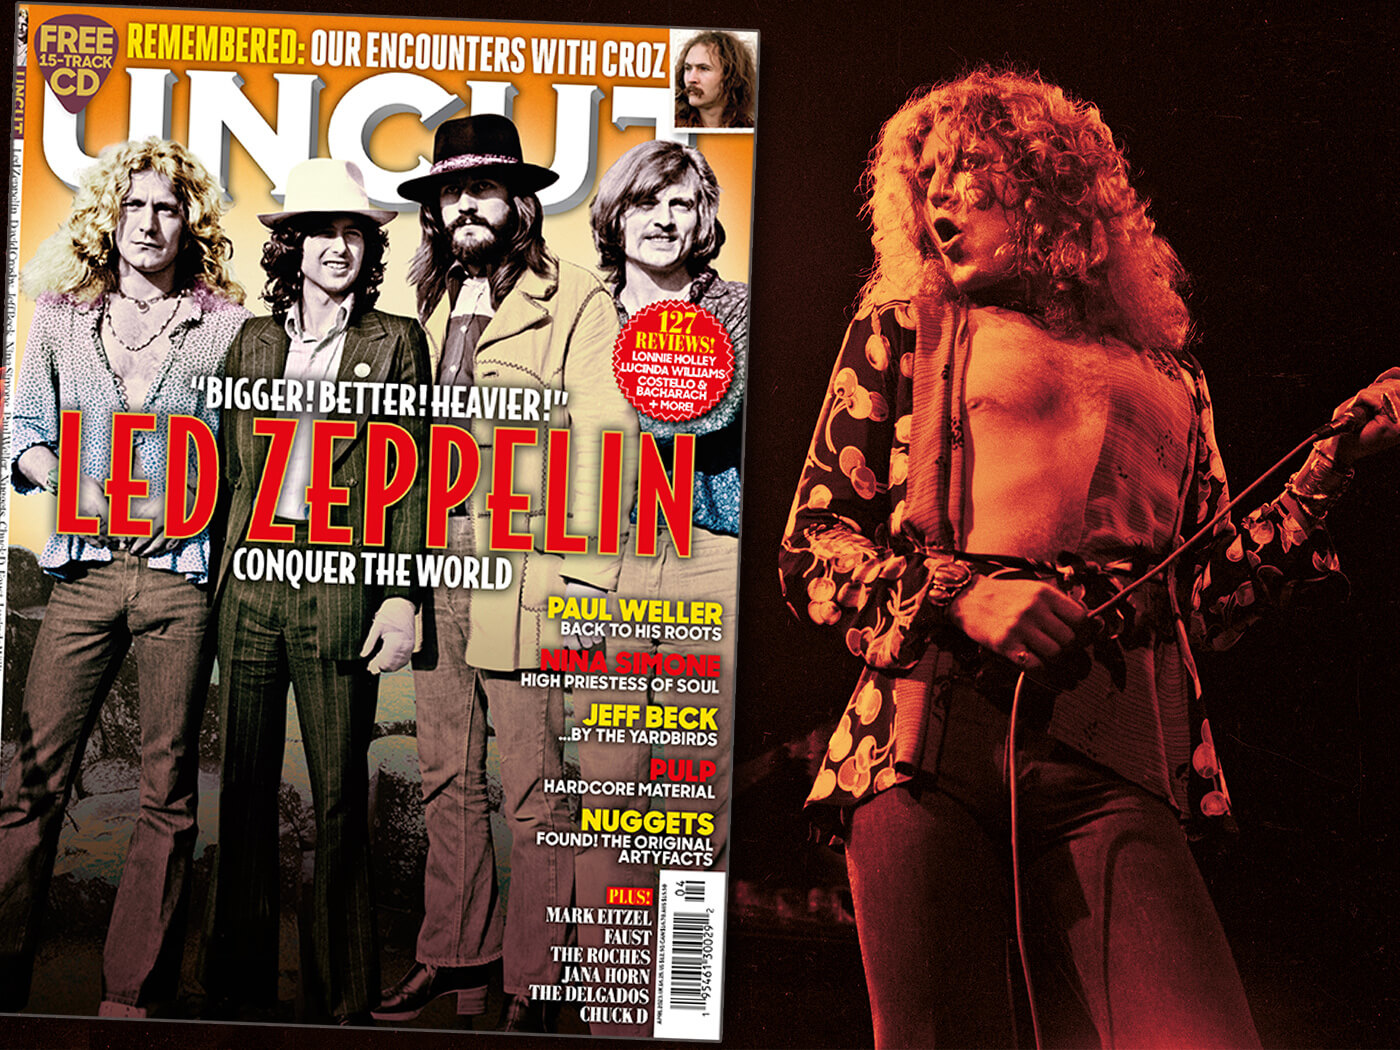 motto Forberedende navn Miniature Revisiting Led Zeppelin's meteoric rise to the top in 1973